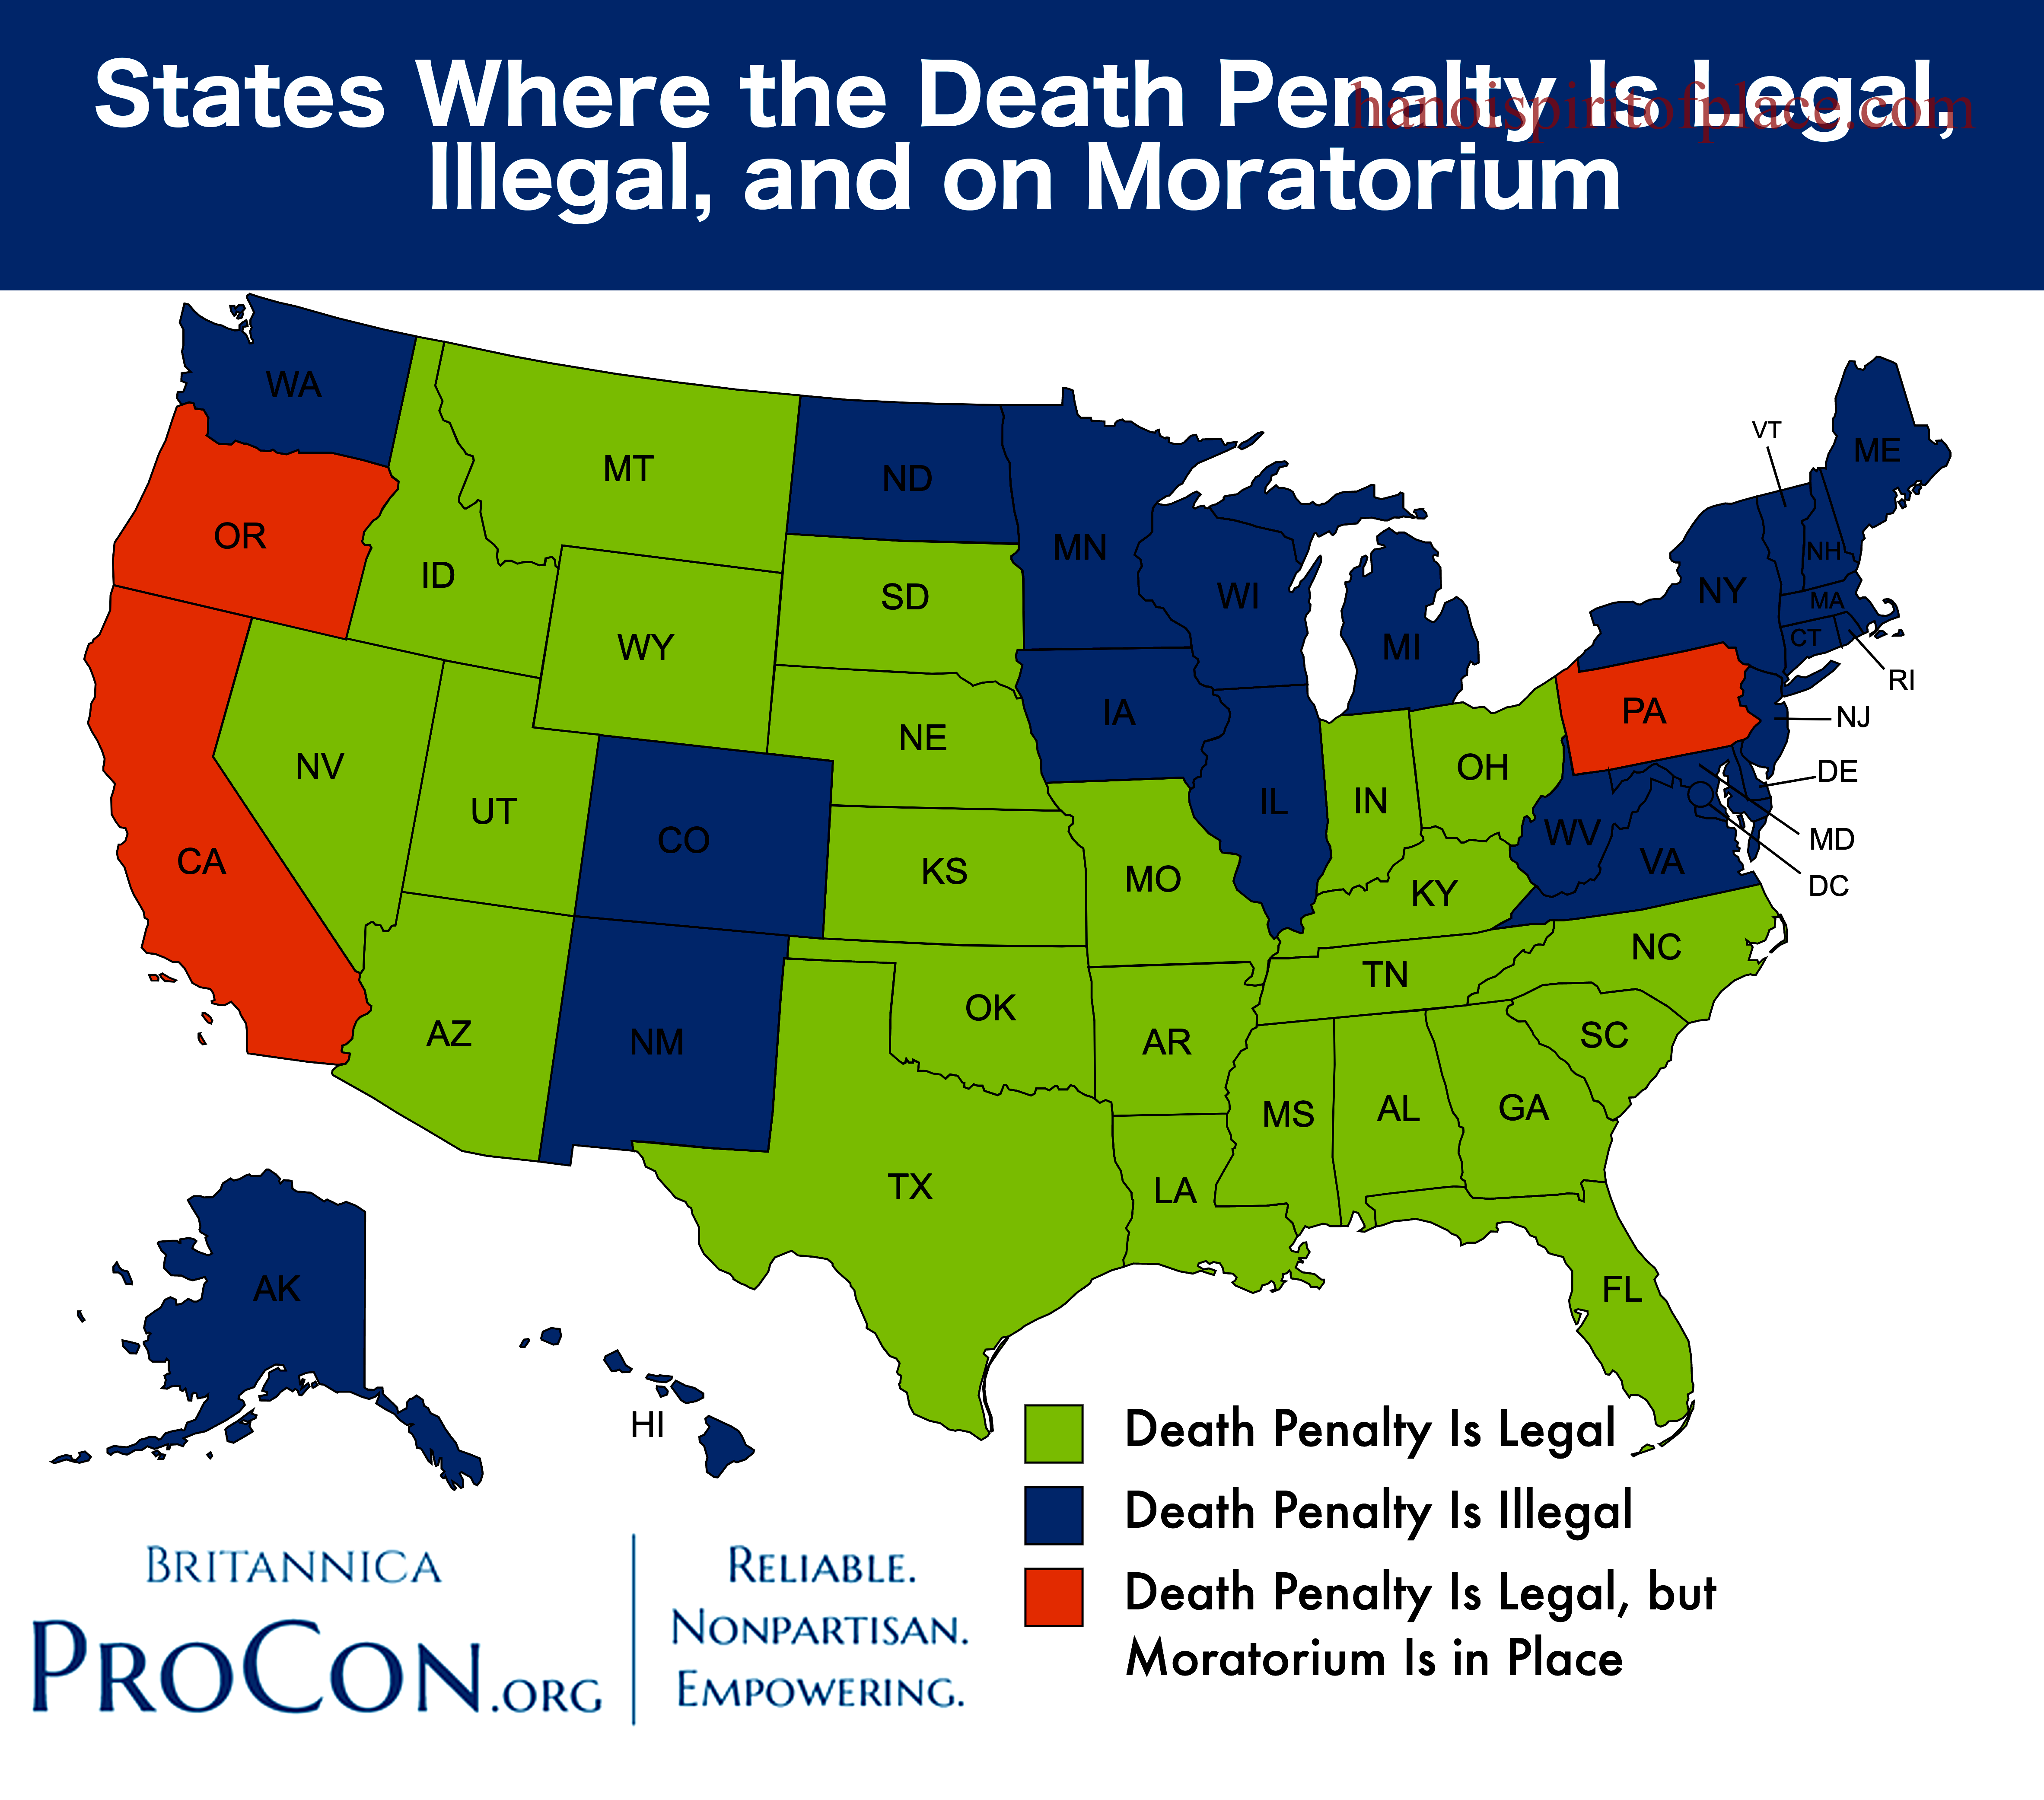 Brief overview of the death penalty